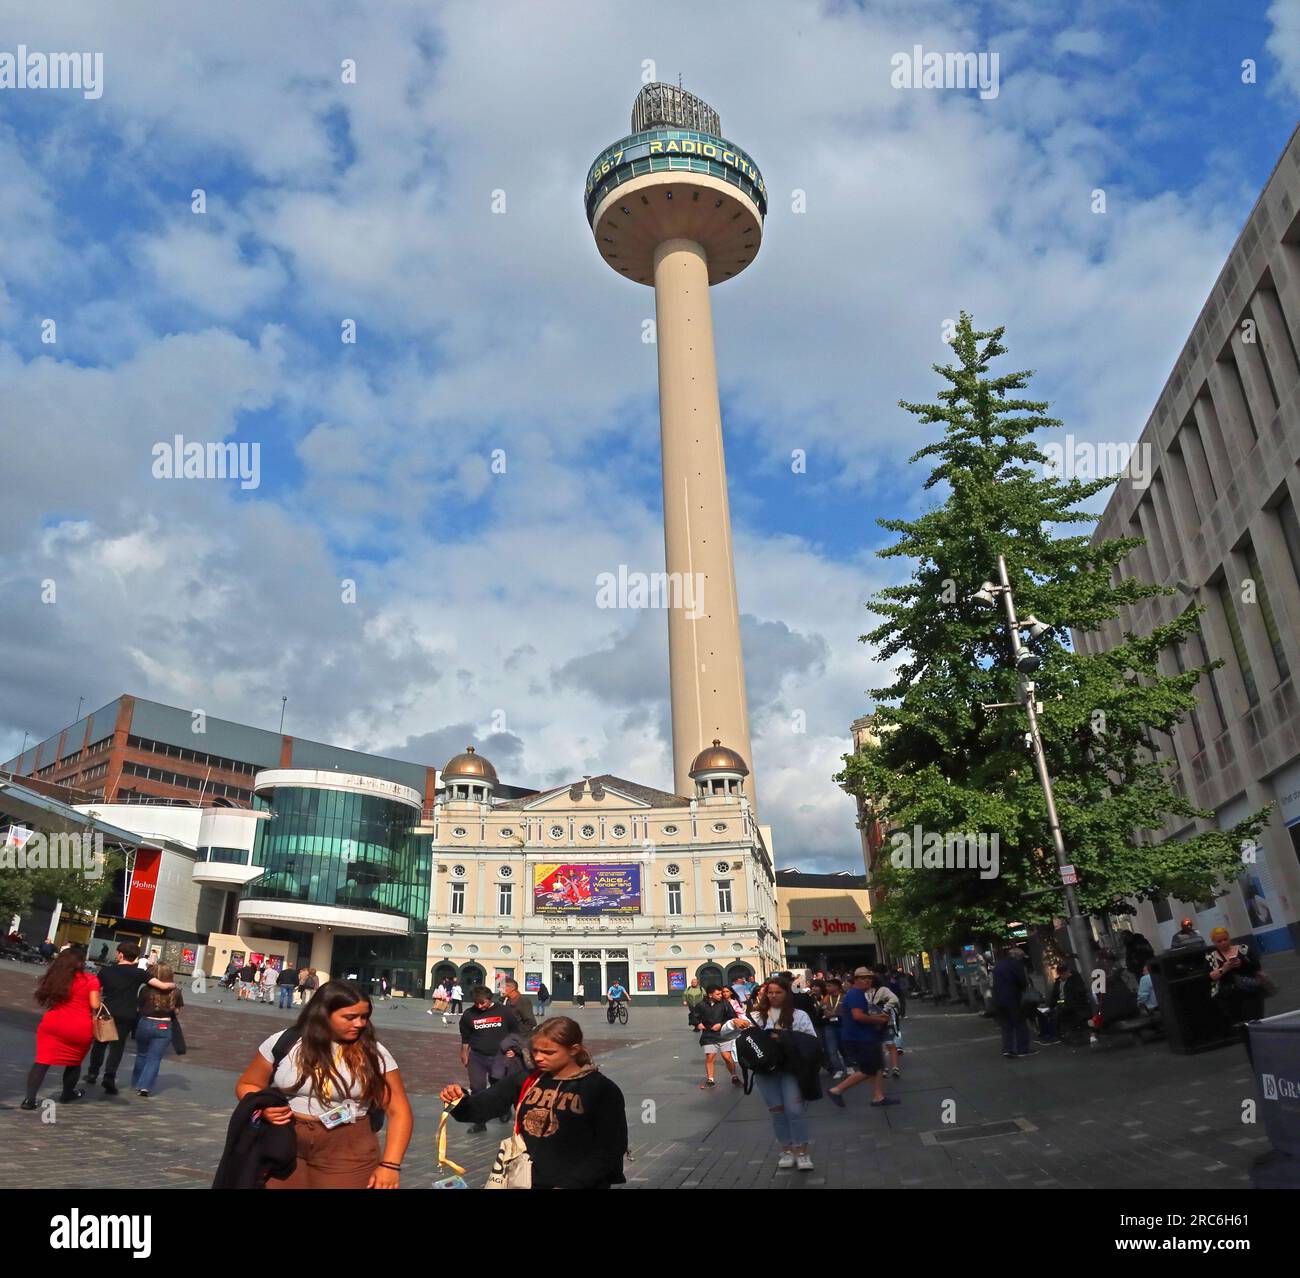 The Liverpool Playhouse Theatre with Radio City tower, Williamson Square, Liverpool, Merseyside, England, UK, L1 1EL Stock Photo